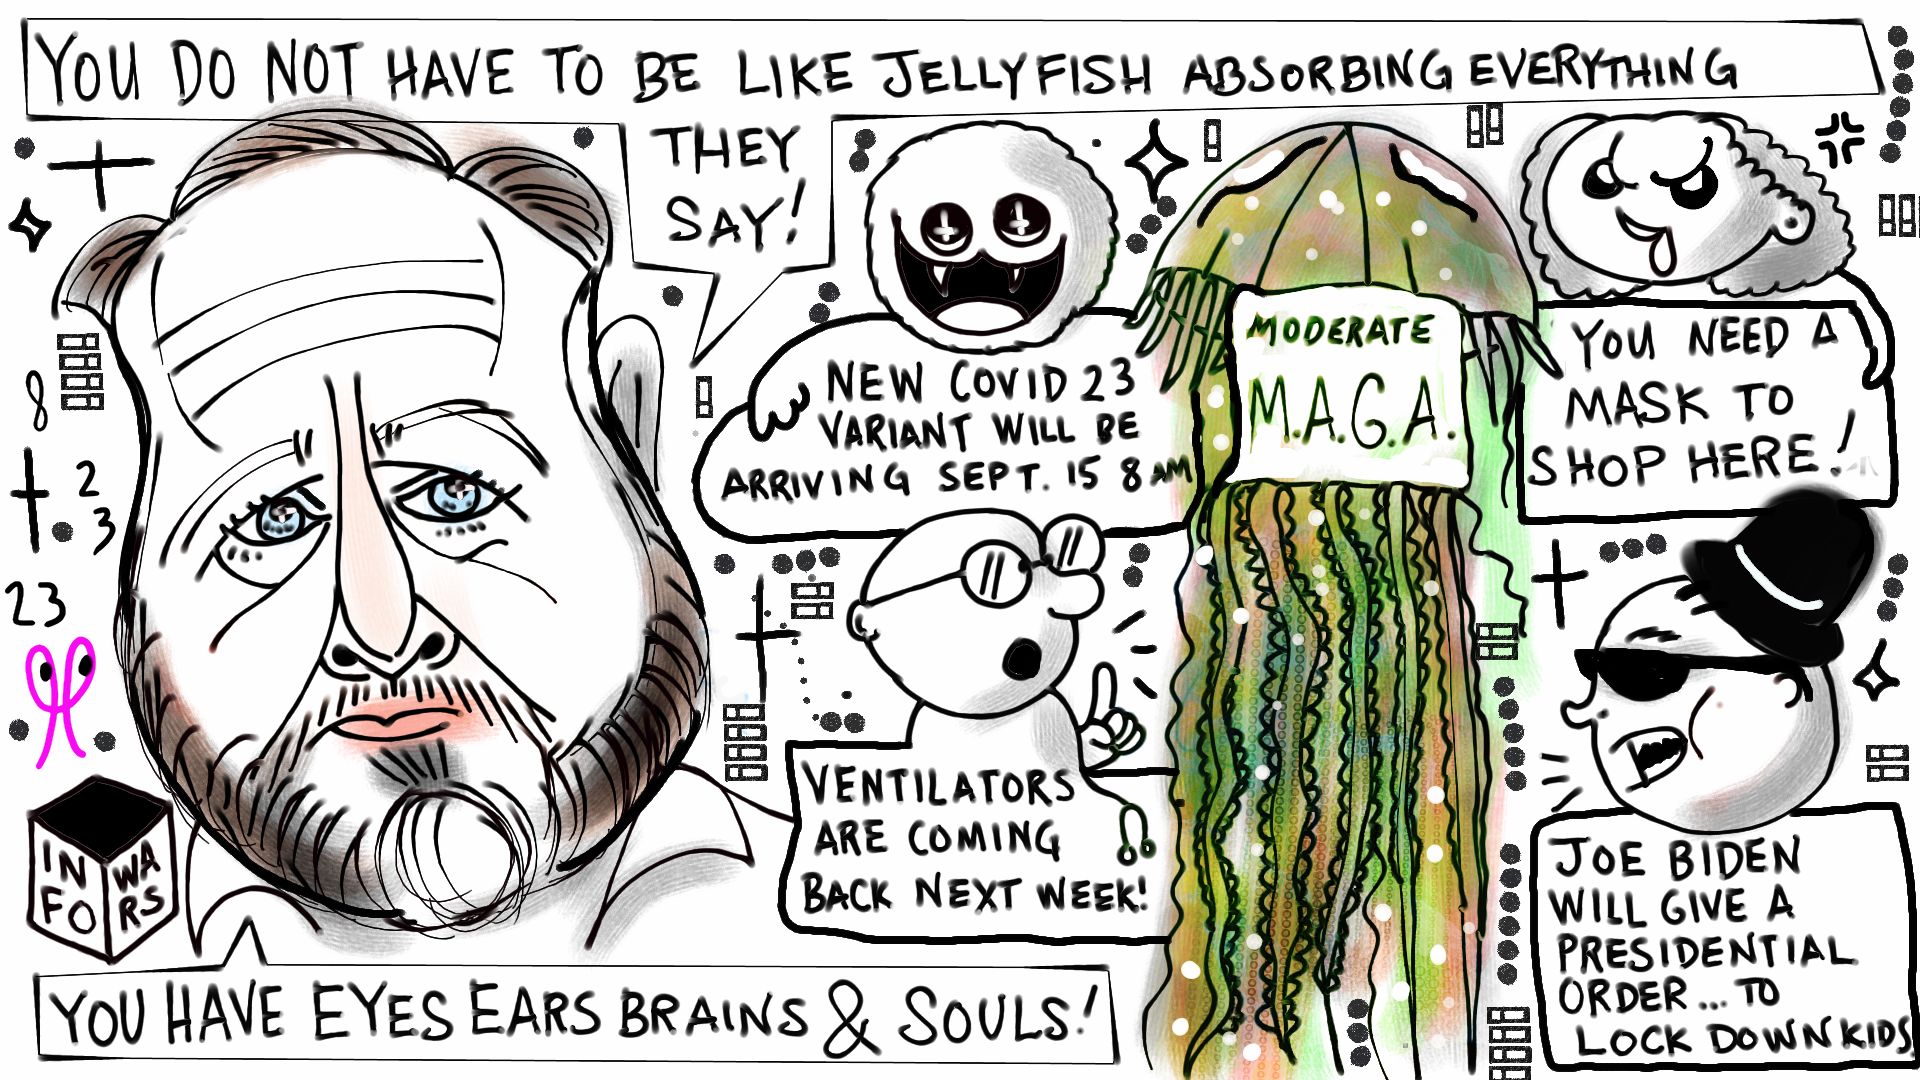 ALEX JONES INFOWARS POLITICAL CARTOON about Moderate MAGA REPUBLICANS like Jellyfish and reminding them of their divinity. post thumbnail image